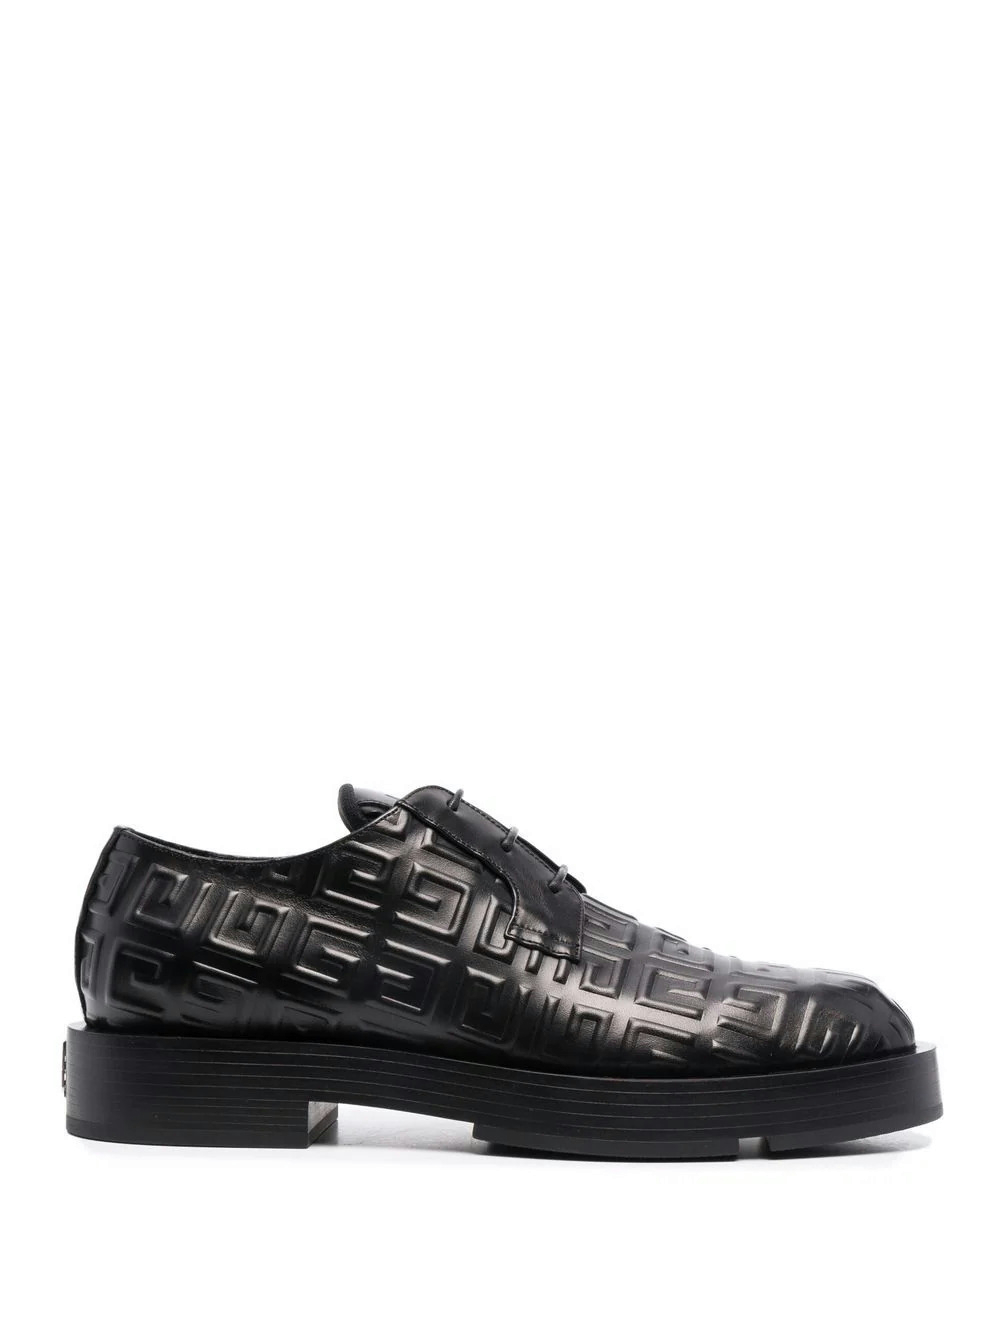 Givenchy - 4G-motif lace-up derby shoes